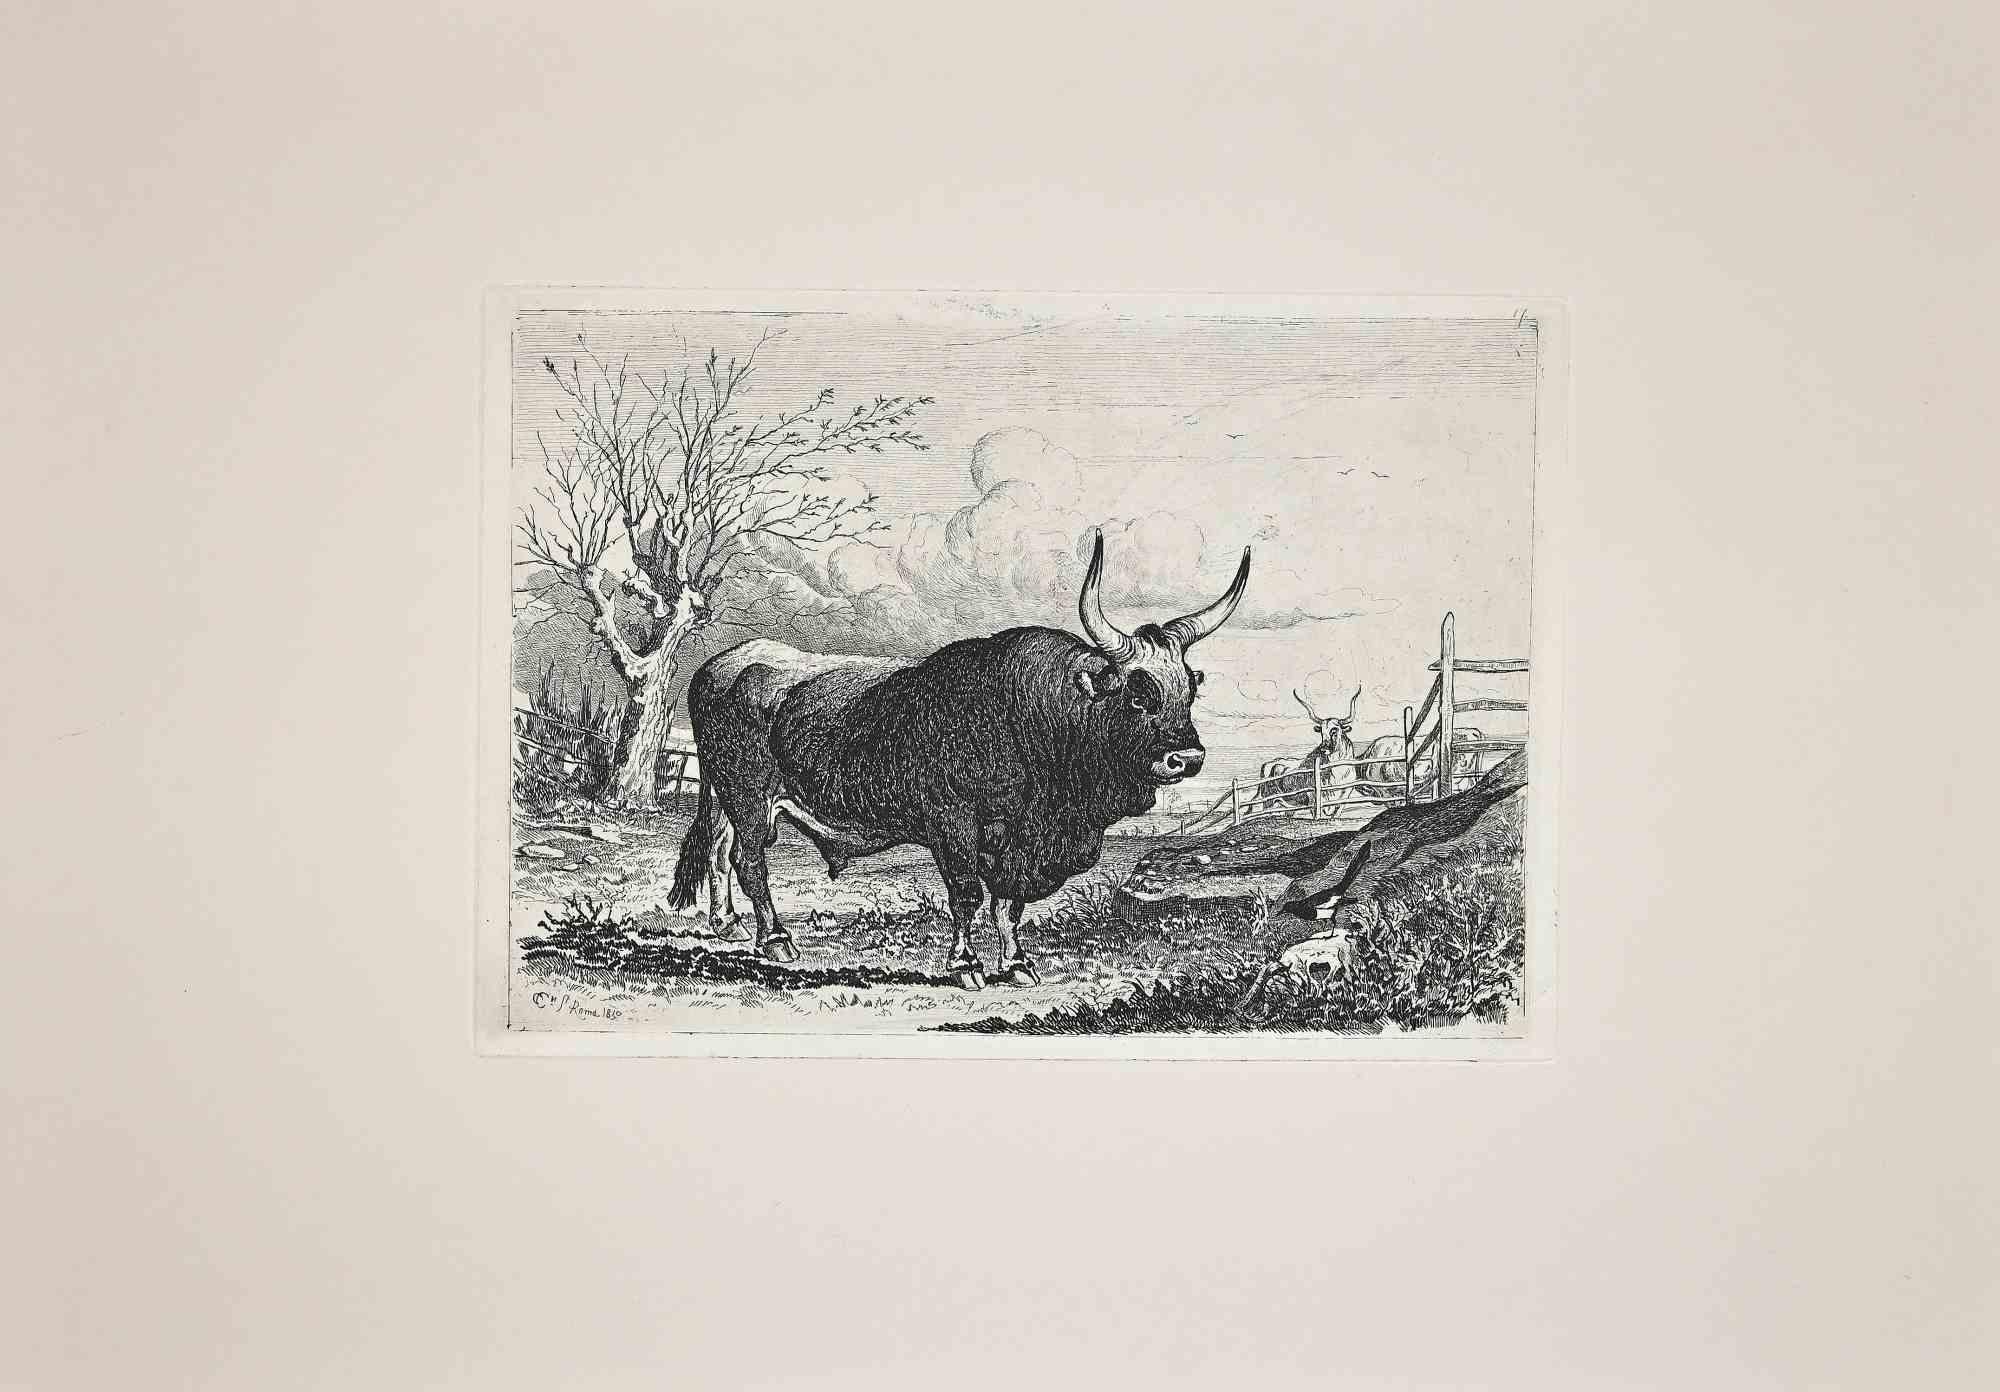 Charles Coleman Animal Print - The Bull in Roman Countryside - Original Etching by Charles Colem - 1992